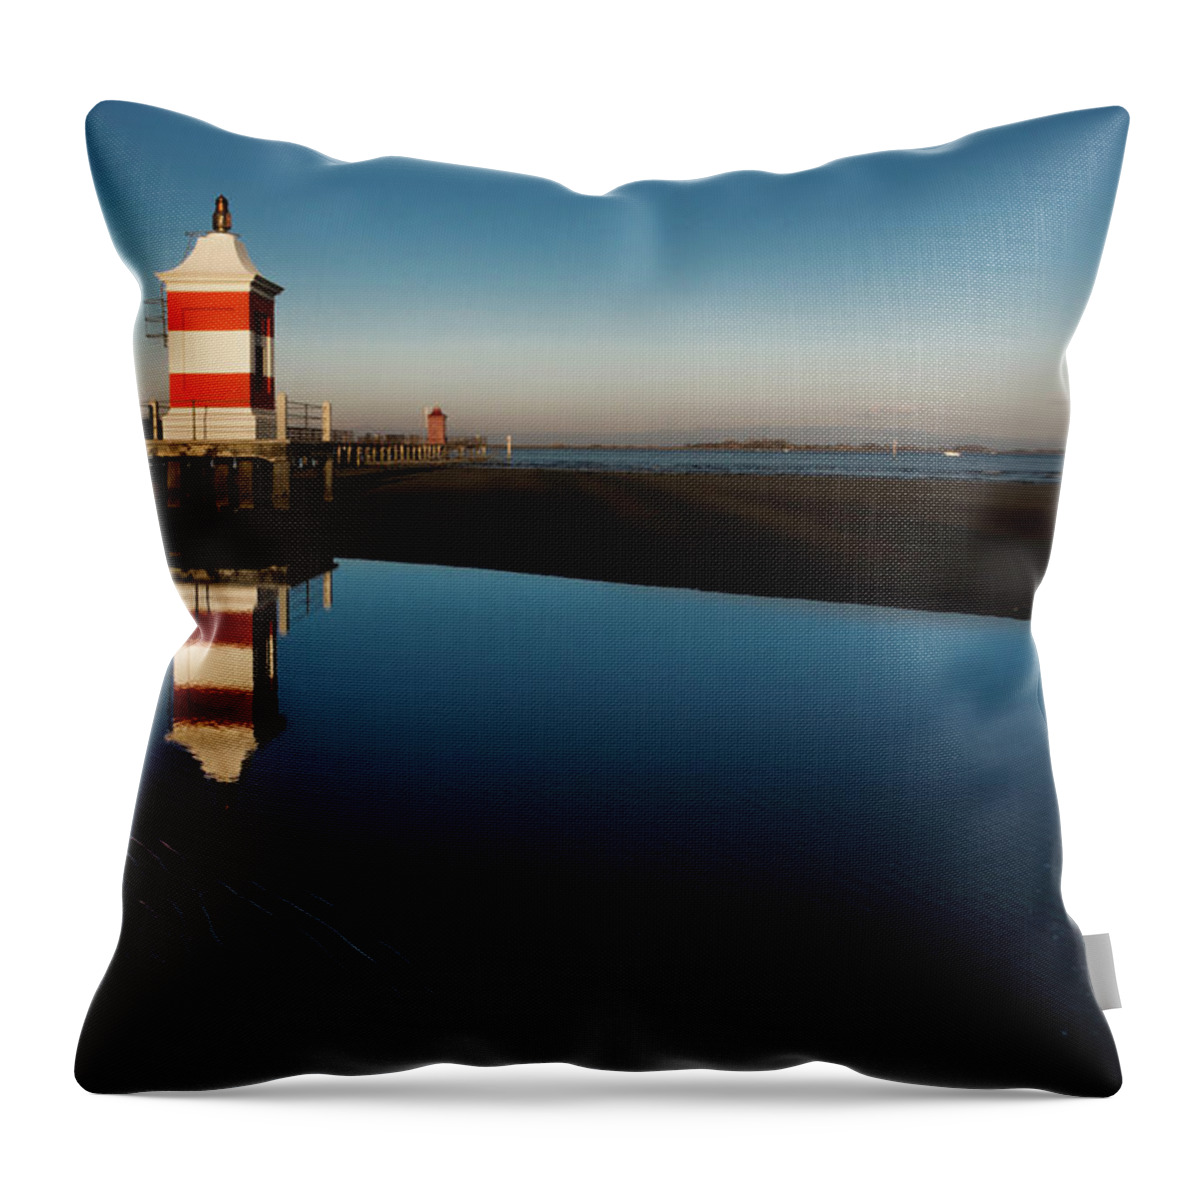 Landscape Throw Pillow featuring the photograph Lignano Lighthouse by Wolfgang Stocker